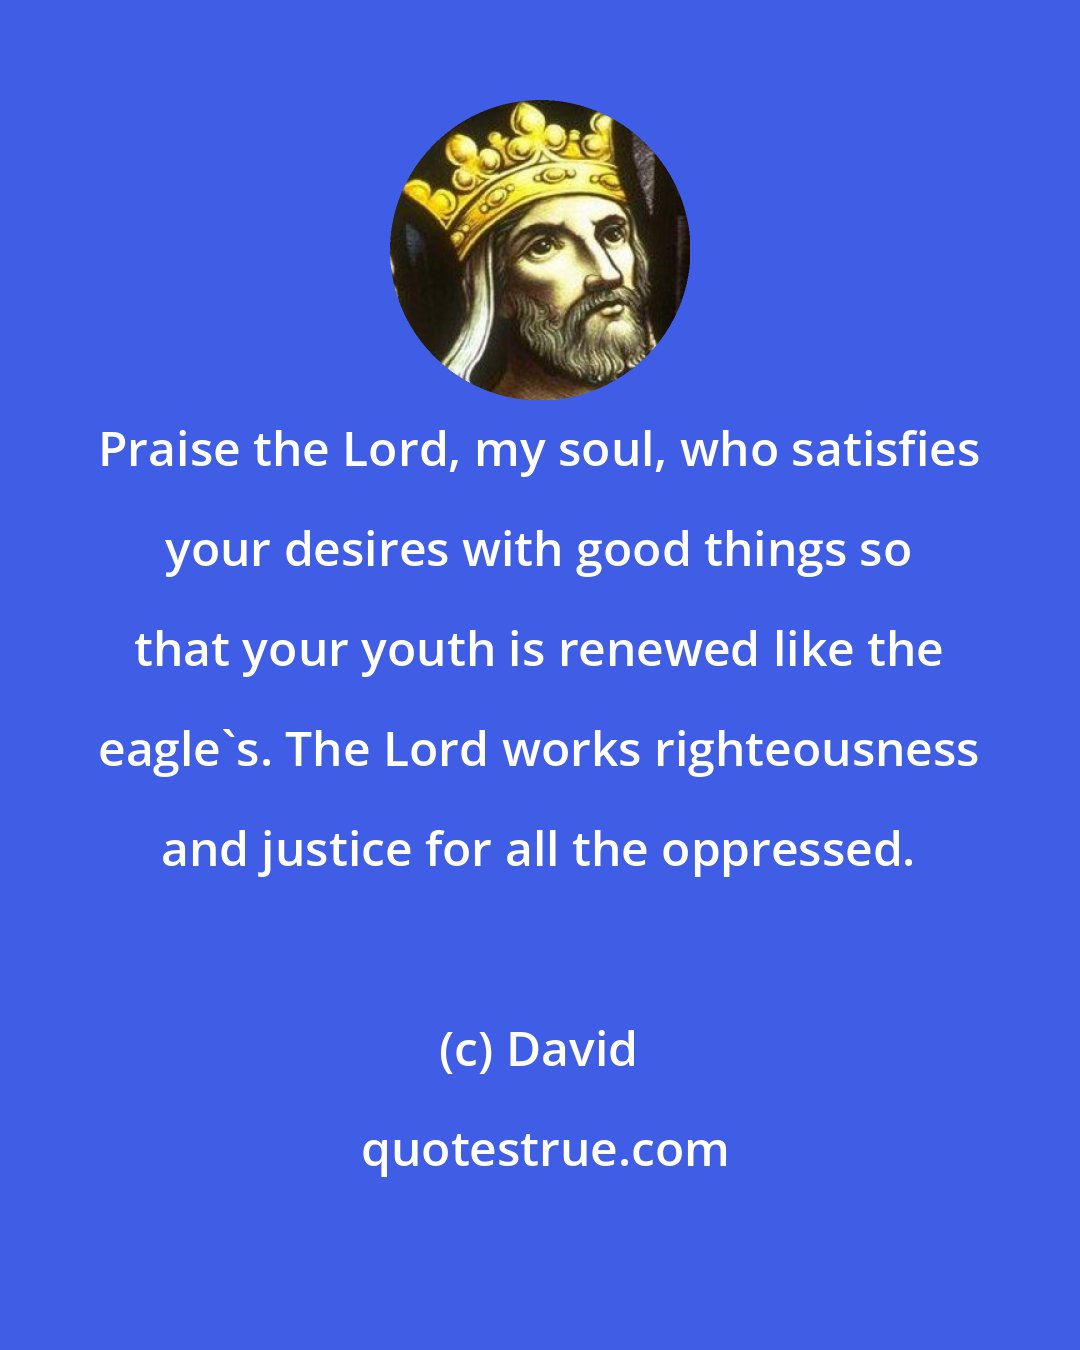 David: Praise the Lord, my soul, who satisfies your desires with good things so that your youth is renewed like the eagle's. The Lord works righteousness and justice for all the oppressed.